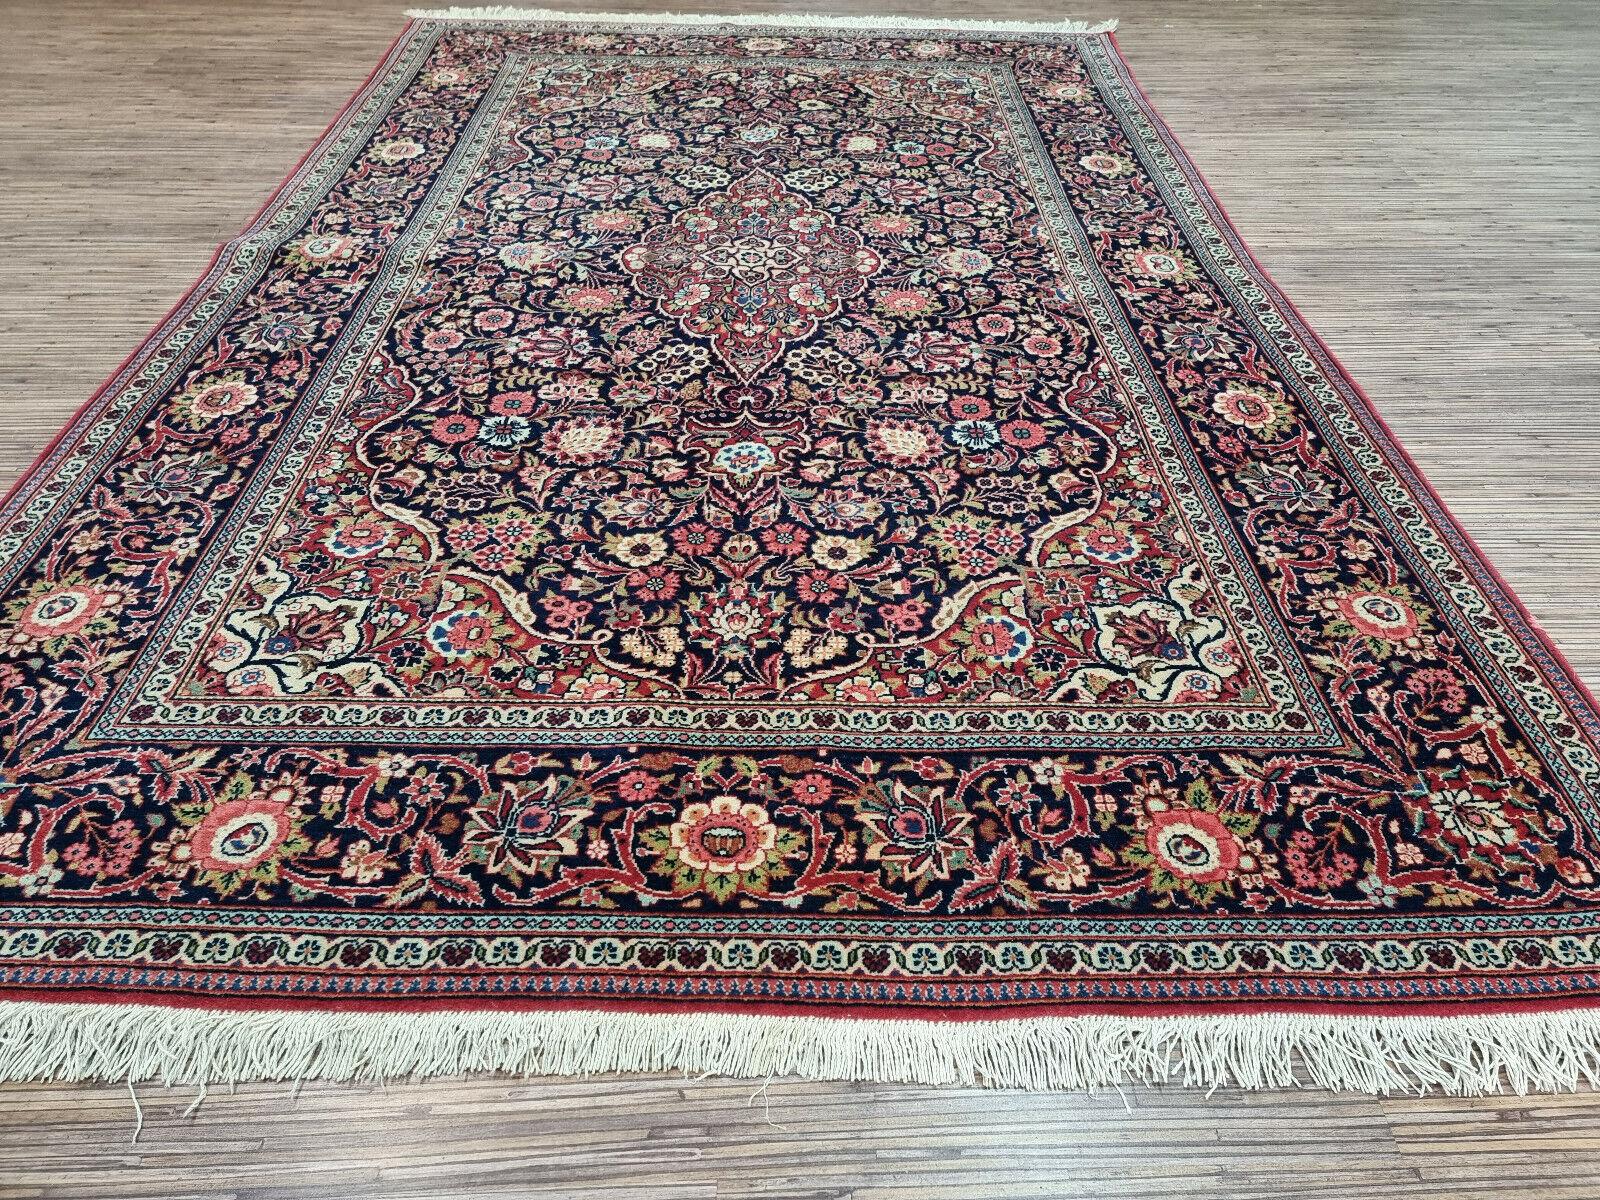 Hand-Knotted Handmade Antique Persian Style Kashan Rug 4.3' x 6.6', 1920s - 1D77 For Sale